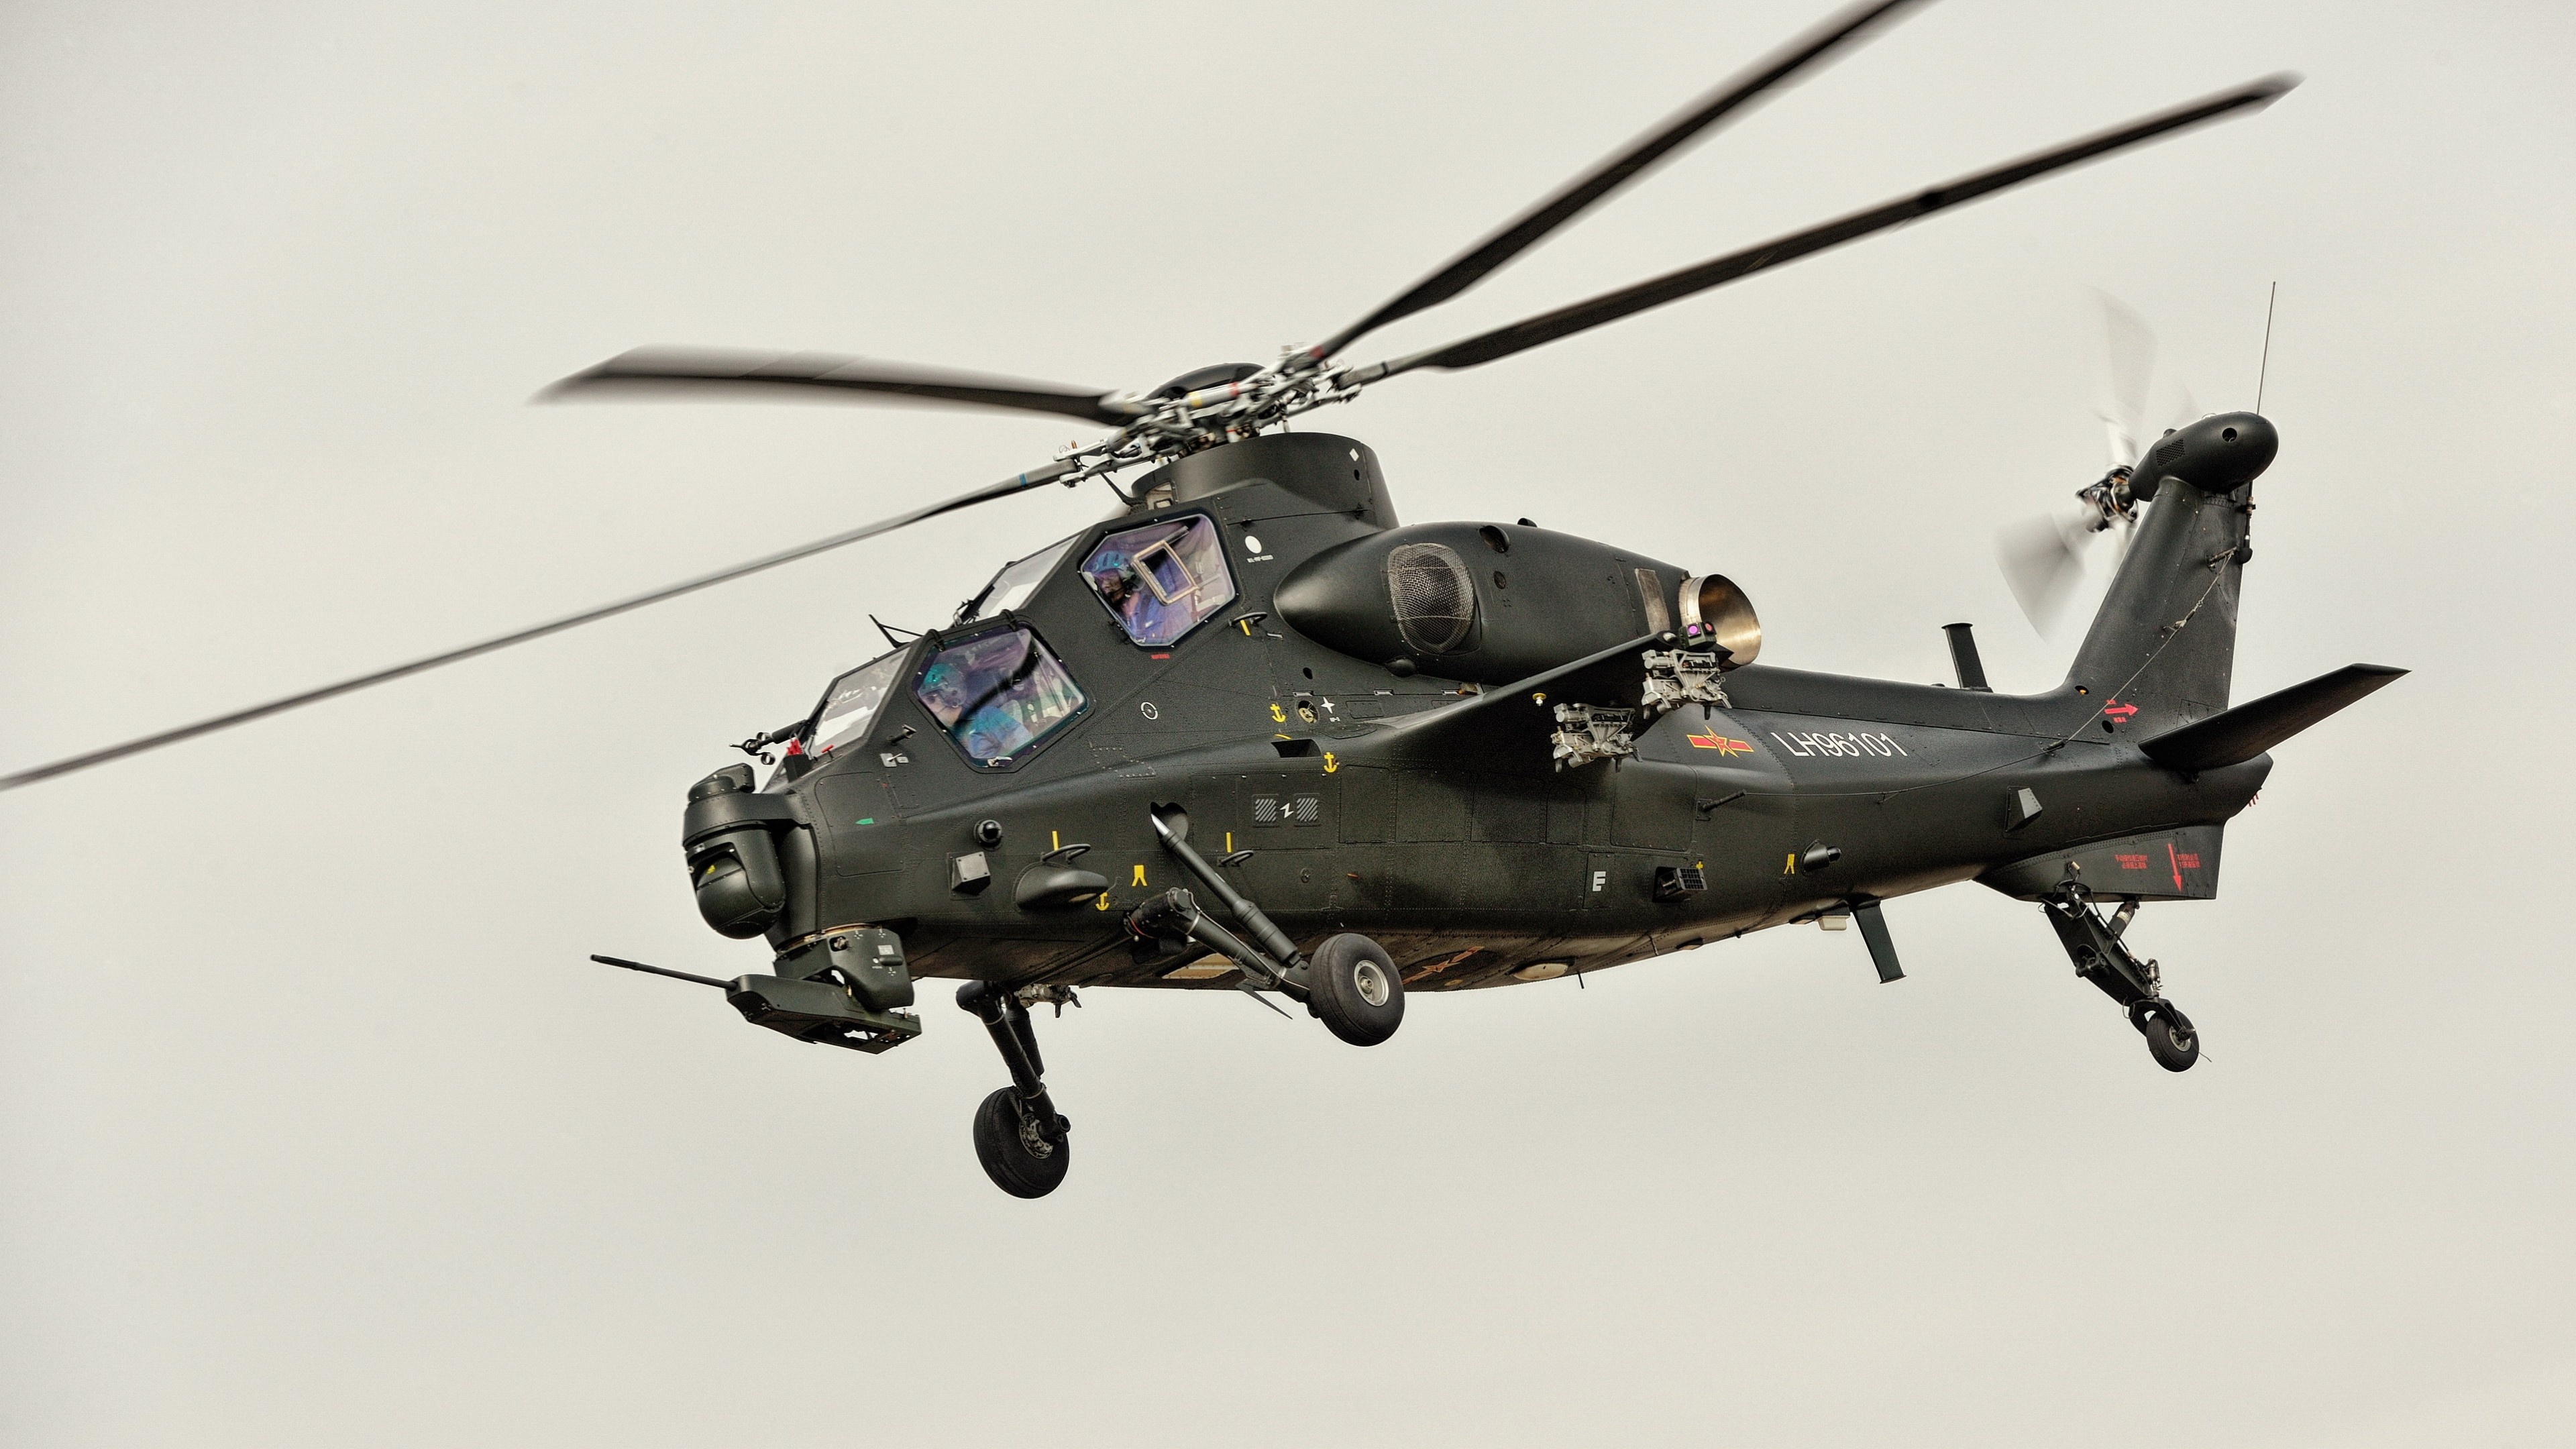 CAIC WZ-10 attack helicopter, China air force, Military wallpaper, Chinese aircraft, 3840x2160 4K Desktop